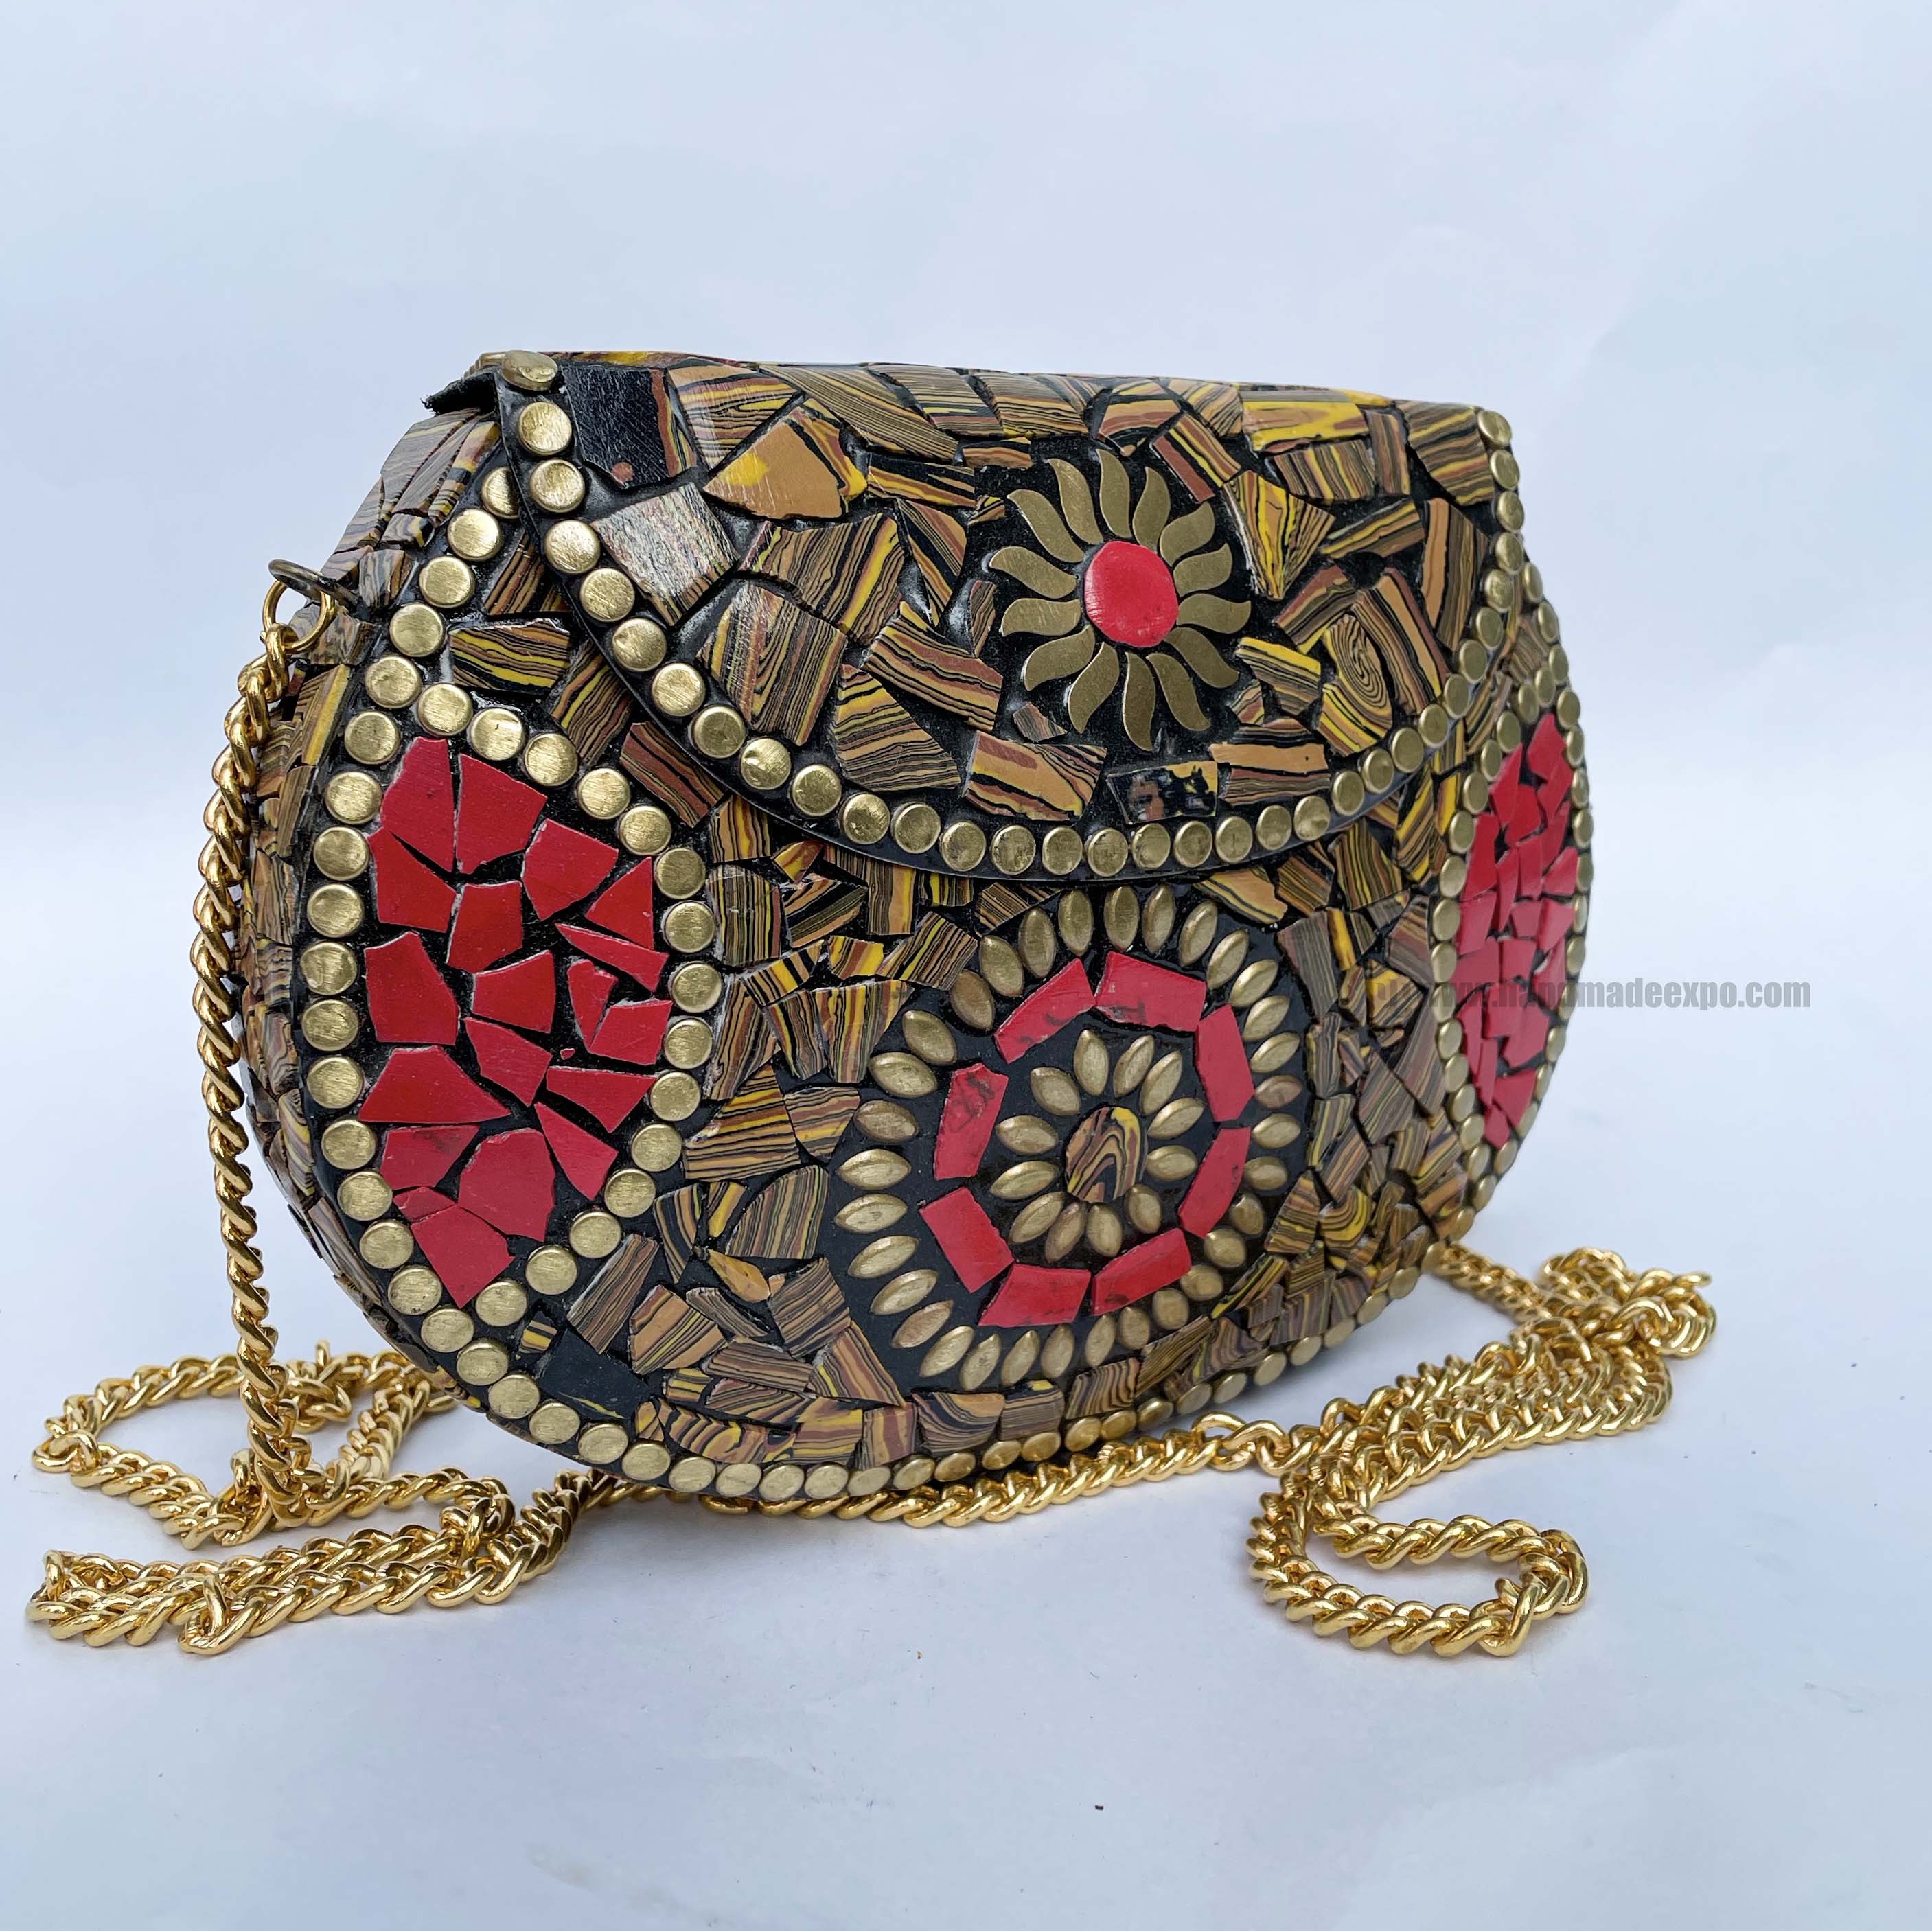 Nepali Handmade Big Ladies Bag With stone Setting, metal, red And Golden Color